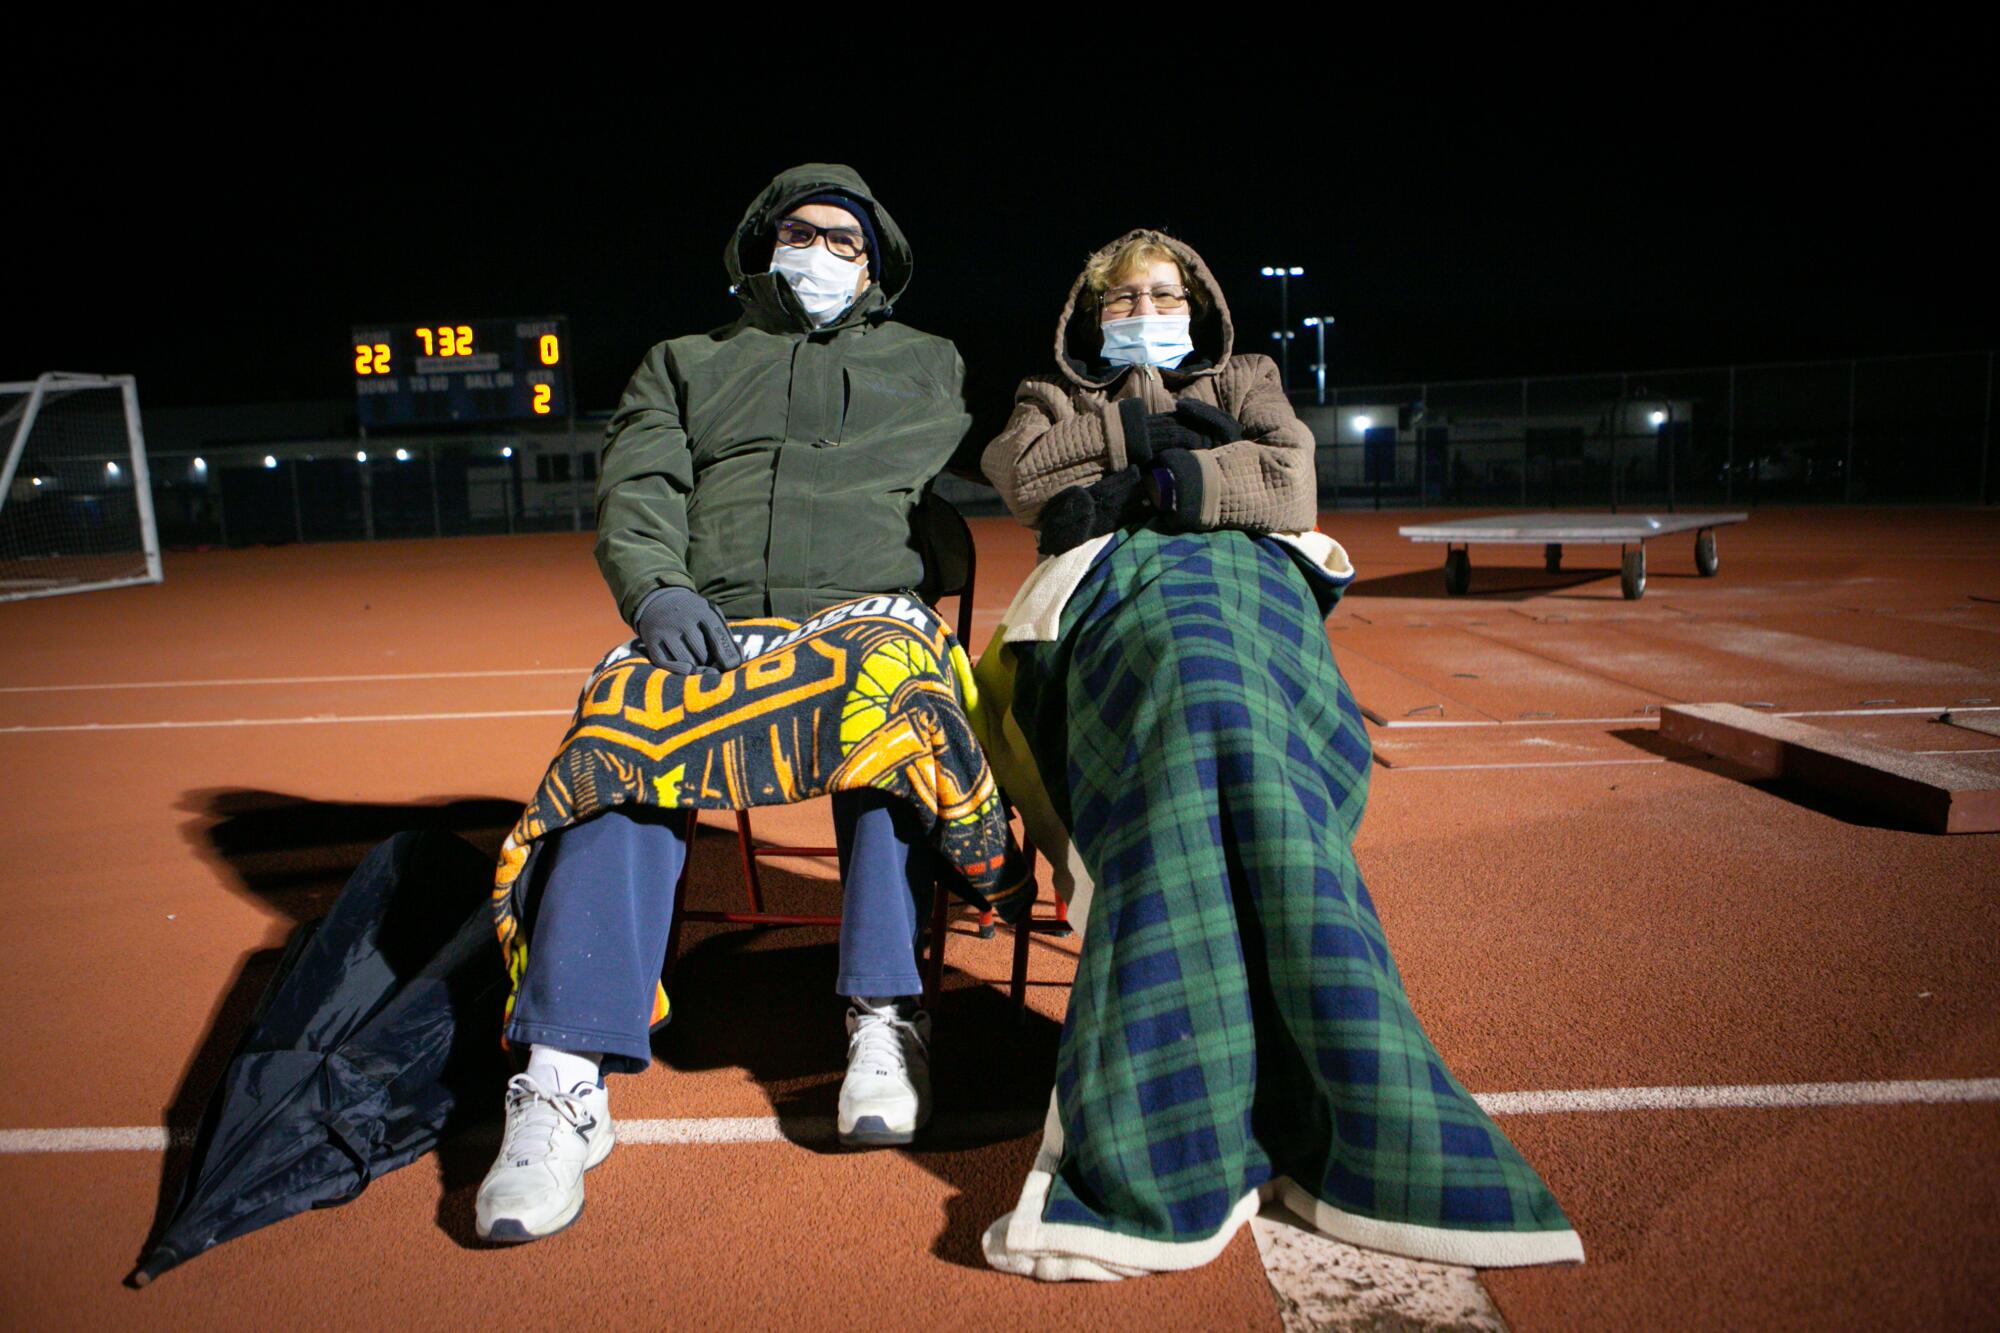 Raymond and Caroline Burt watch the game while bundled up in coats and blankets.